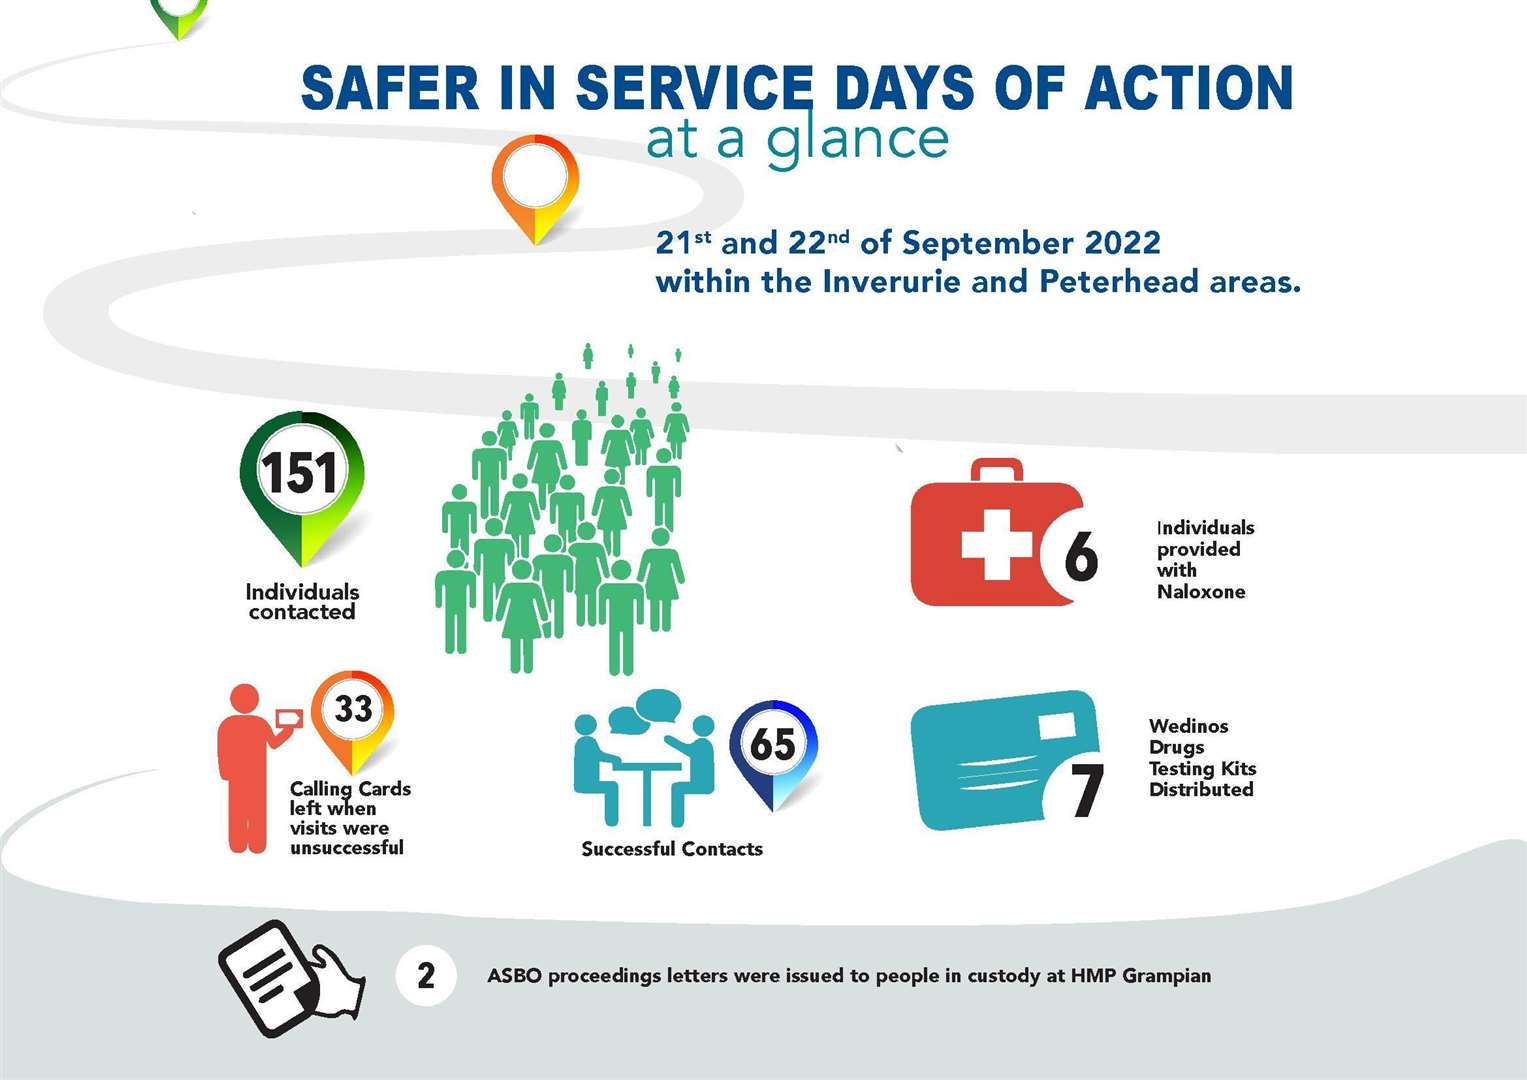 Safer in Service summary for Aberdeenshire